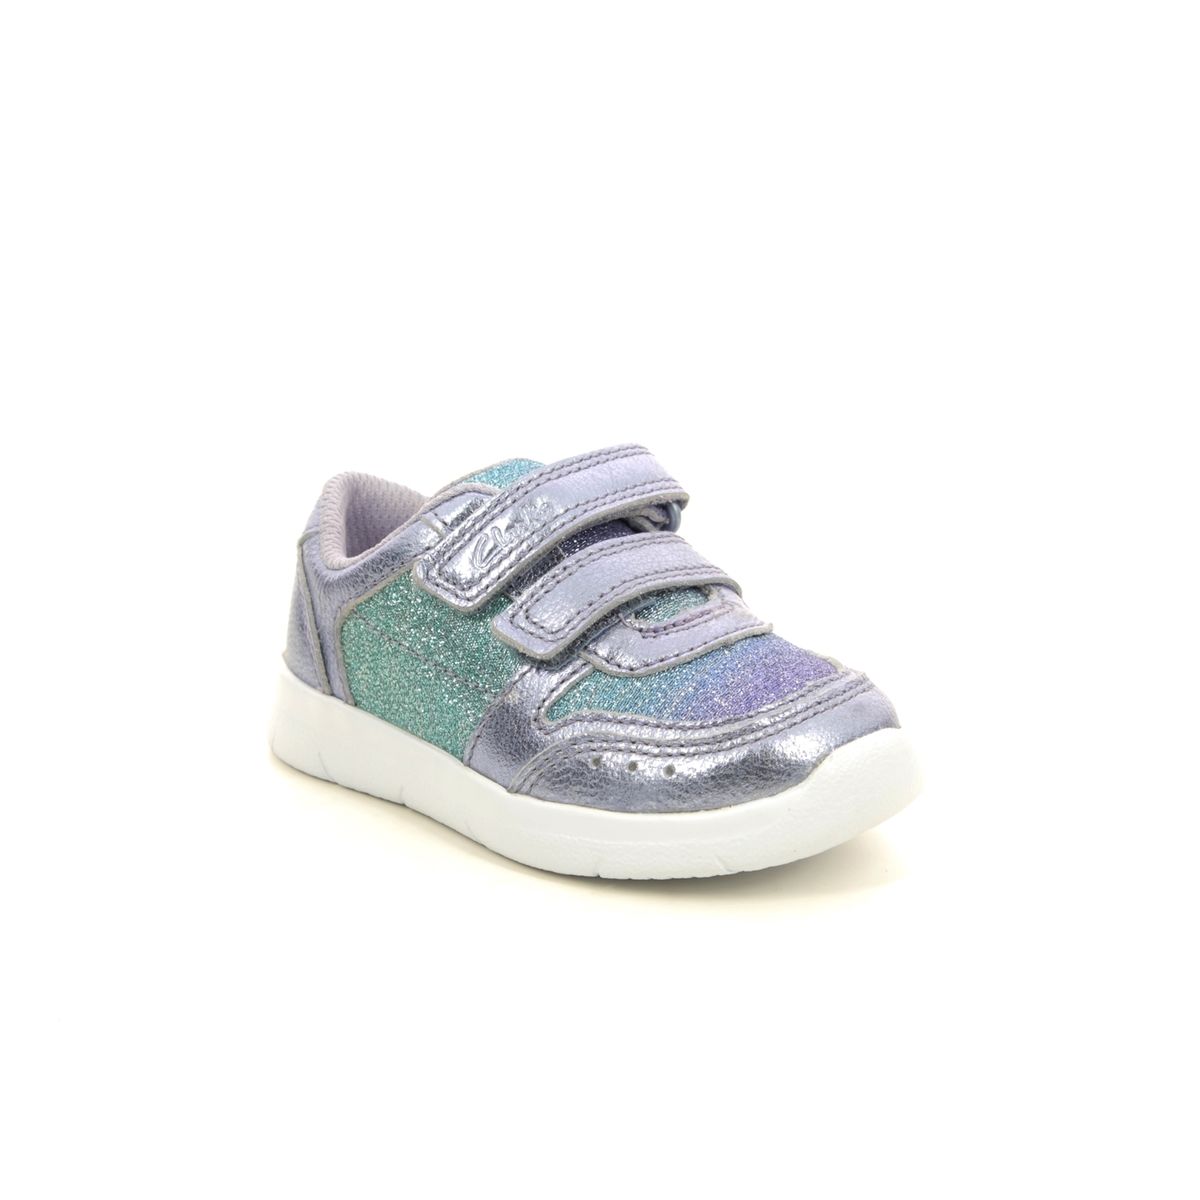 Clarks Ath Sonar T Lilac Kids toddler girls trainers 5412-17G